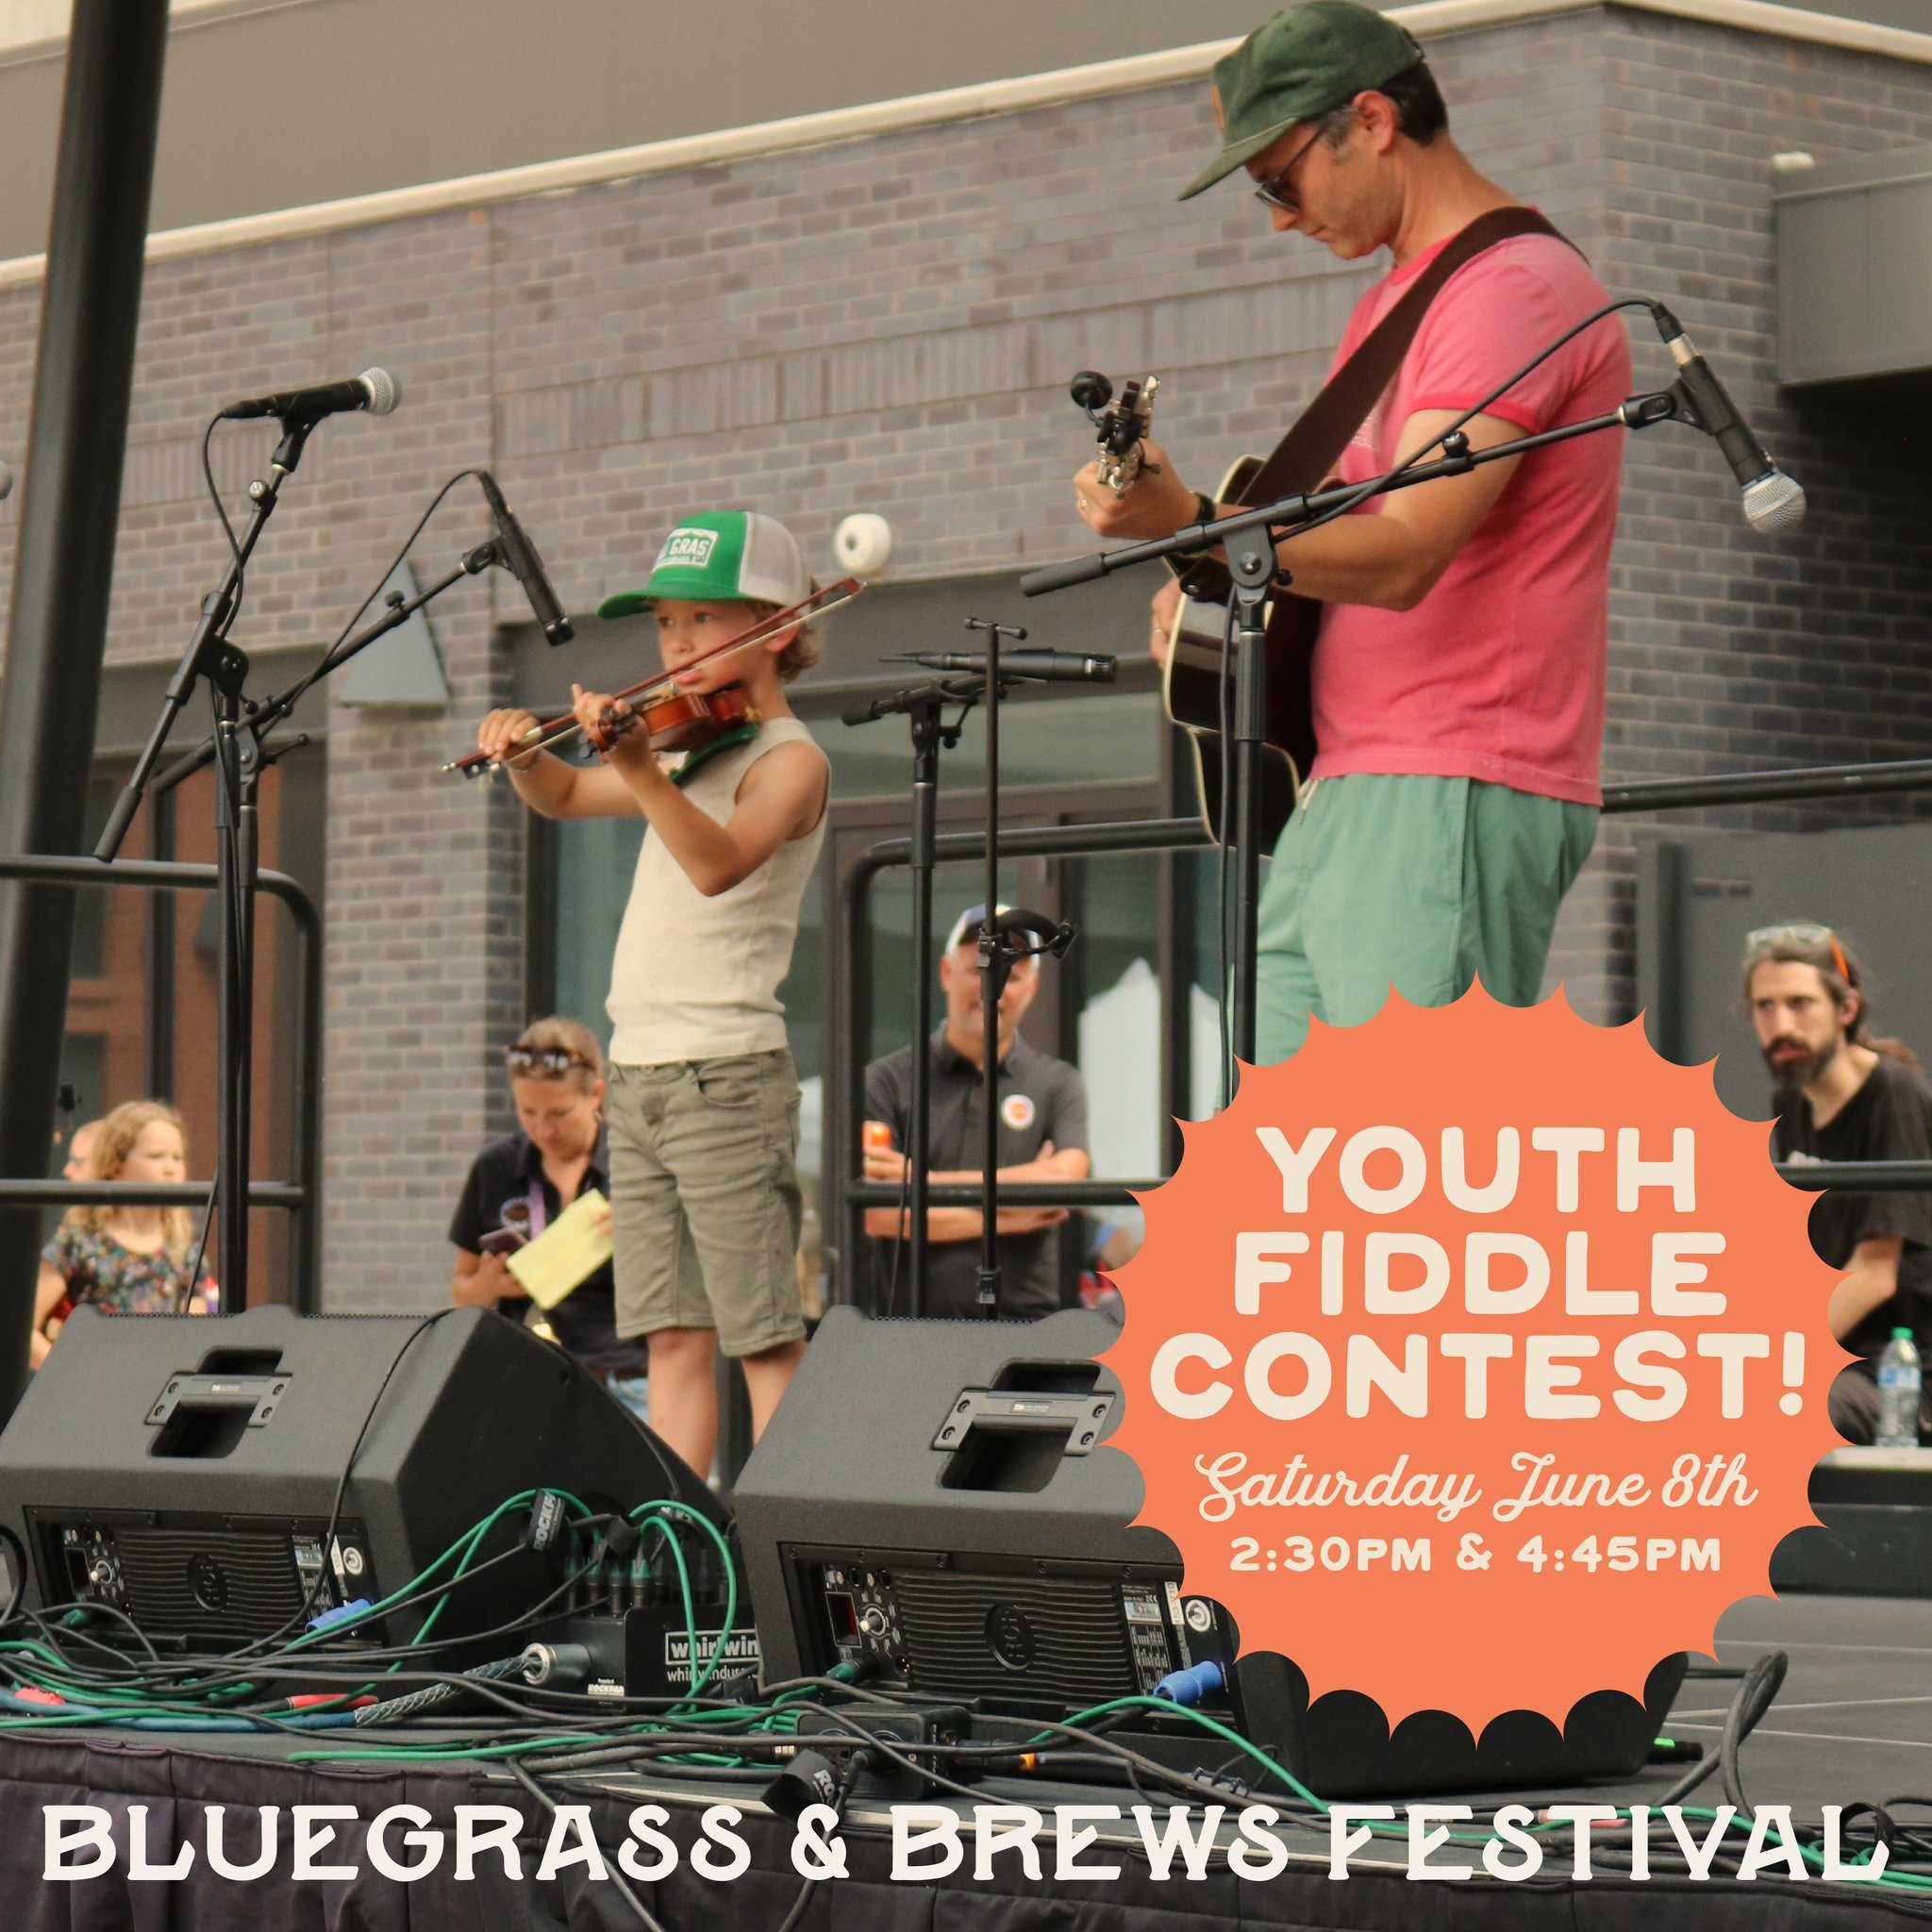 We're bringing back our annual Youth Fiddle Contest! Sign up's are open now! 
We're hosting two age divisions during band breaks on Saturday June 8th.
Ages 12 and under @ around 2:30pm 
Ages 12 through 18 @ around 4:45pm
Division winners will receive